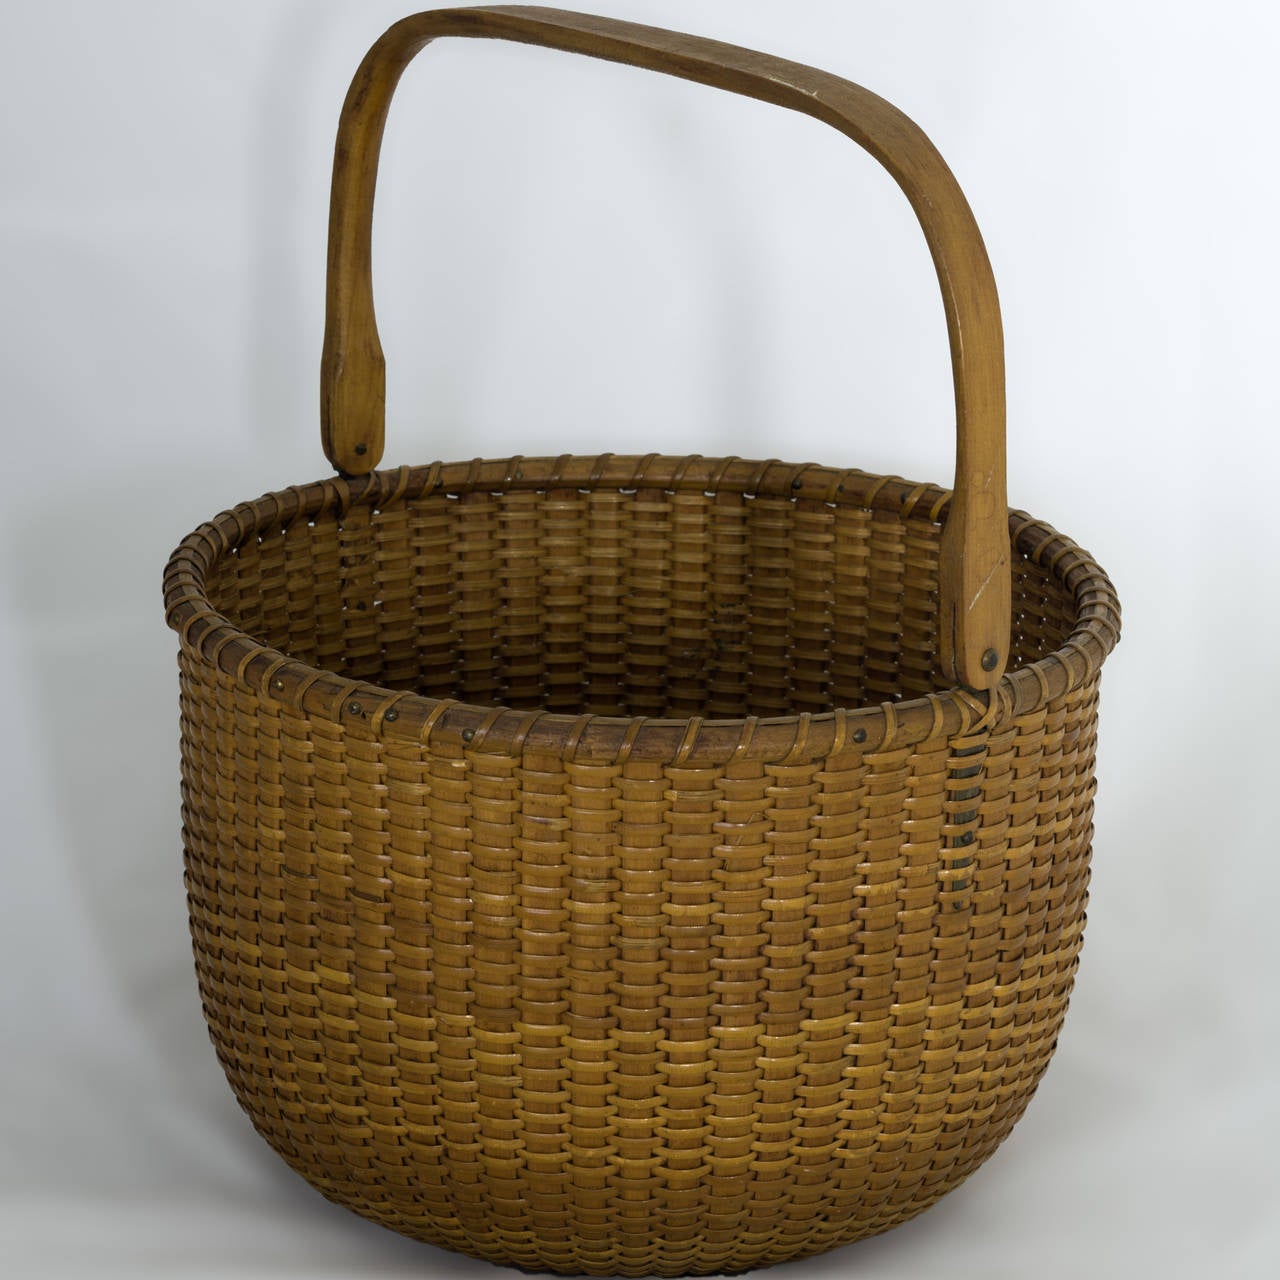 Exceptional Nantucket Lightship basket in excellent condition made by Sherwin Porter Boyer (1907-1964). The basket bears Boyers stamp and jelly label that reads:
